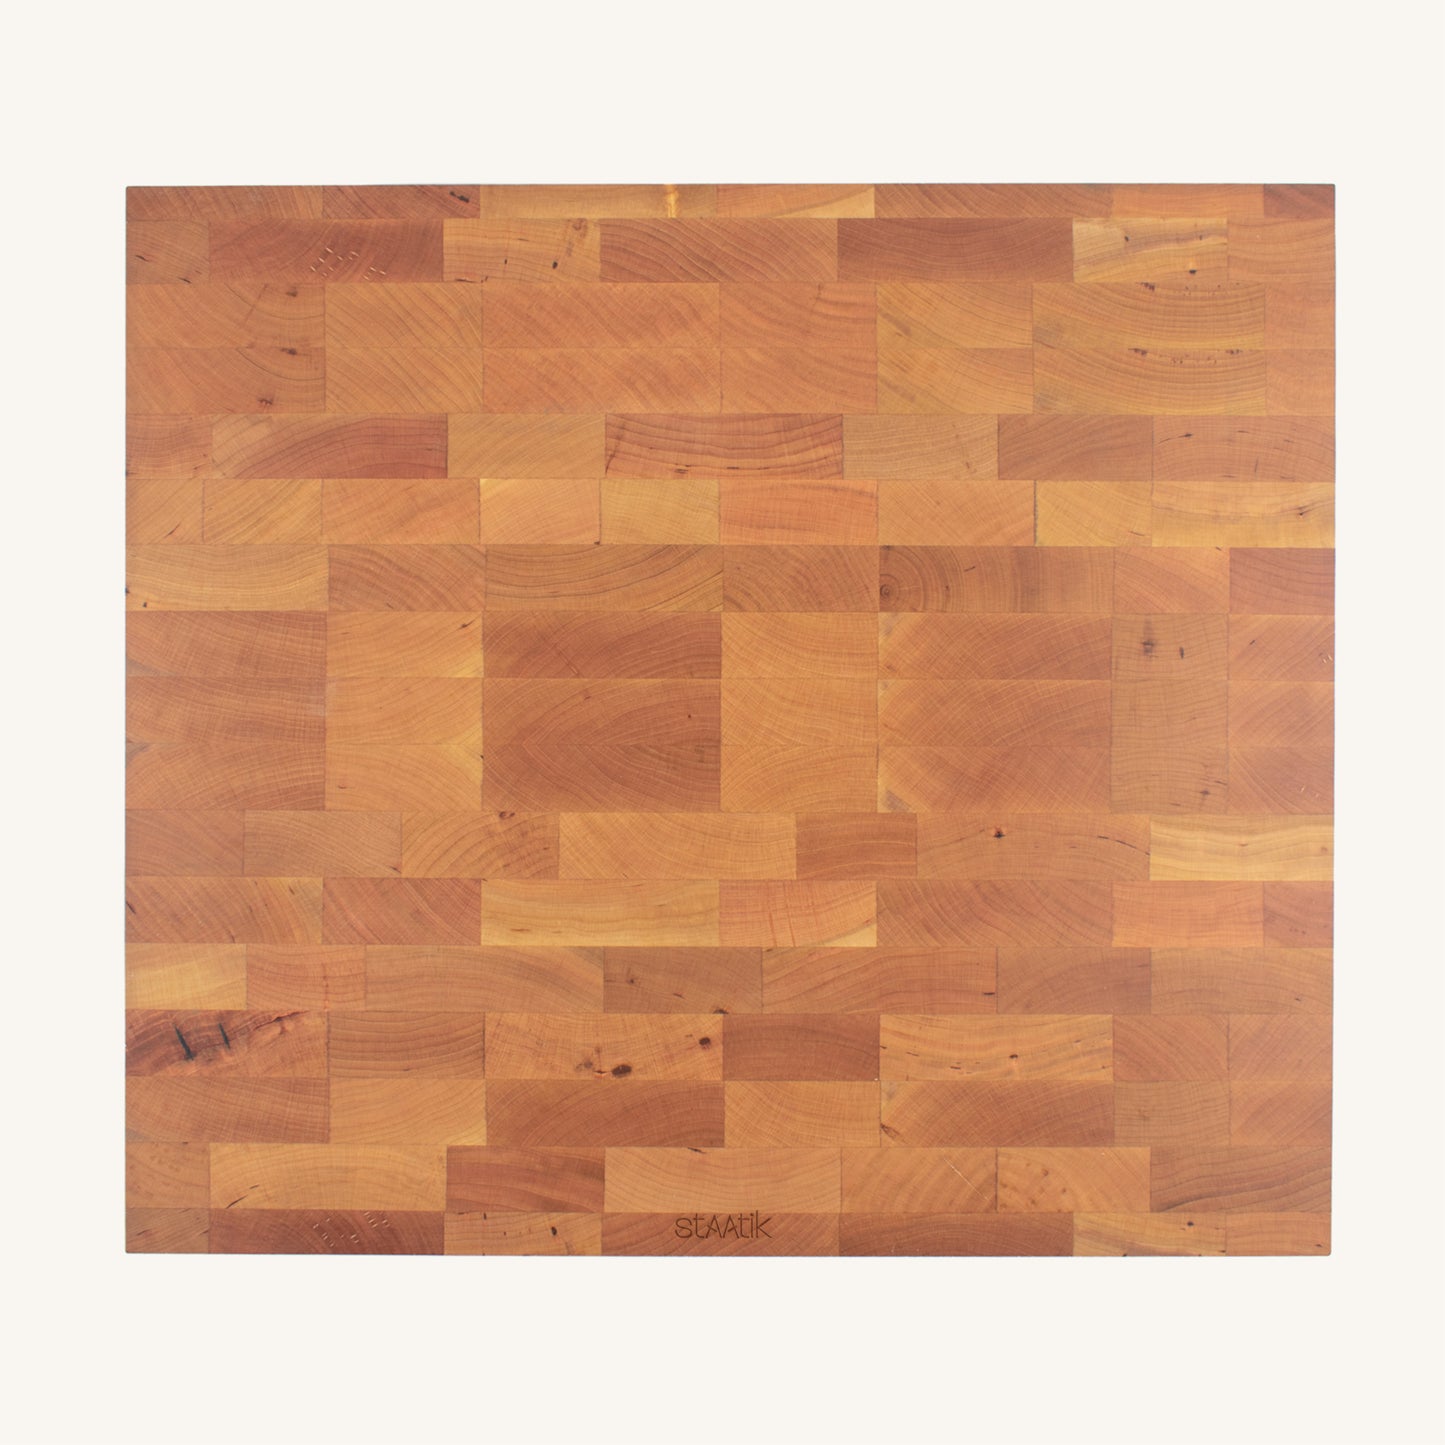 Large End Grain Butcher Block with Side Handle Indents